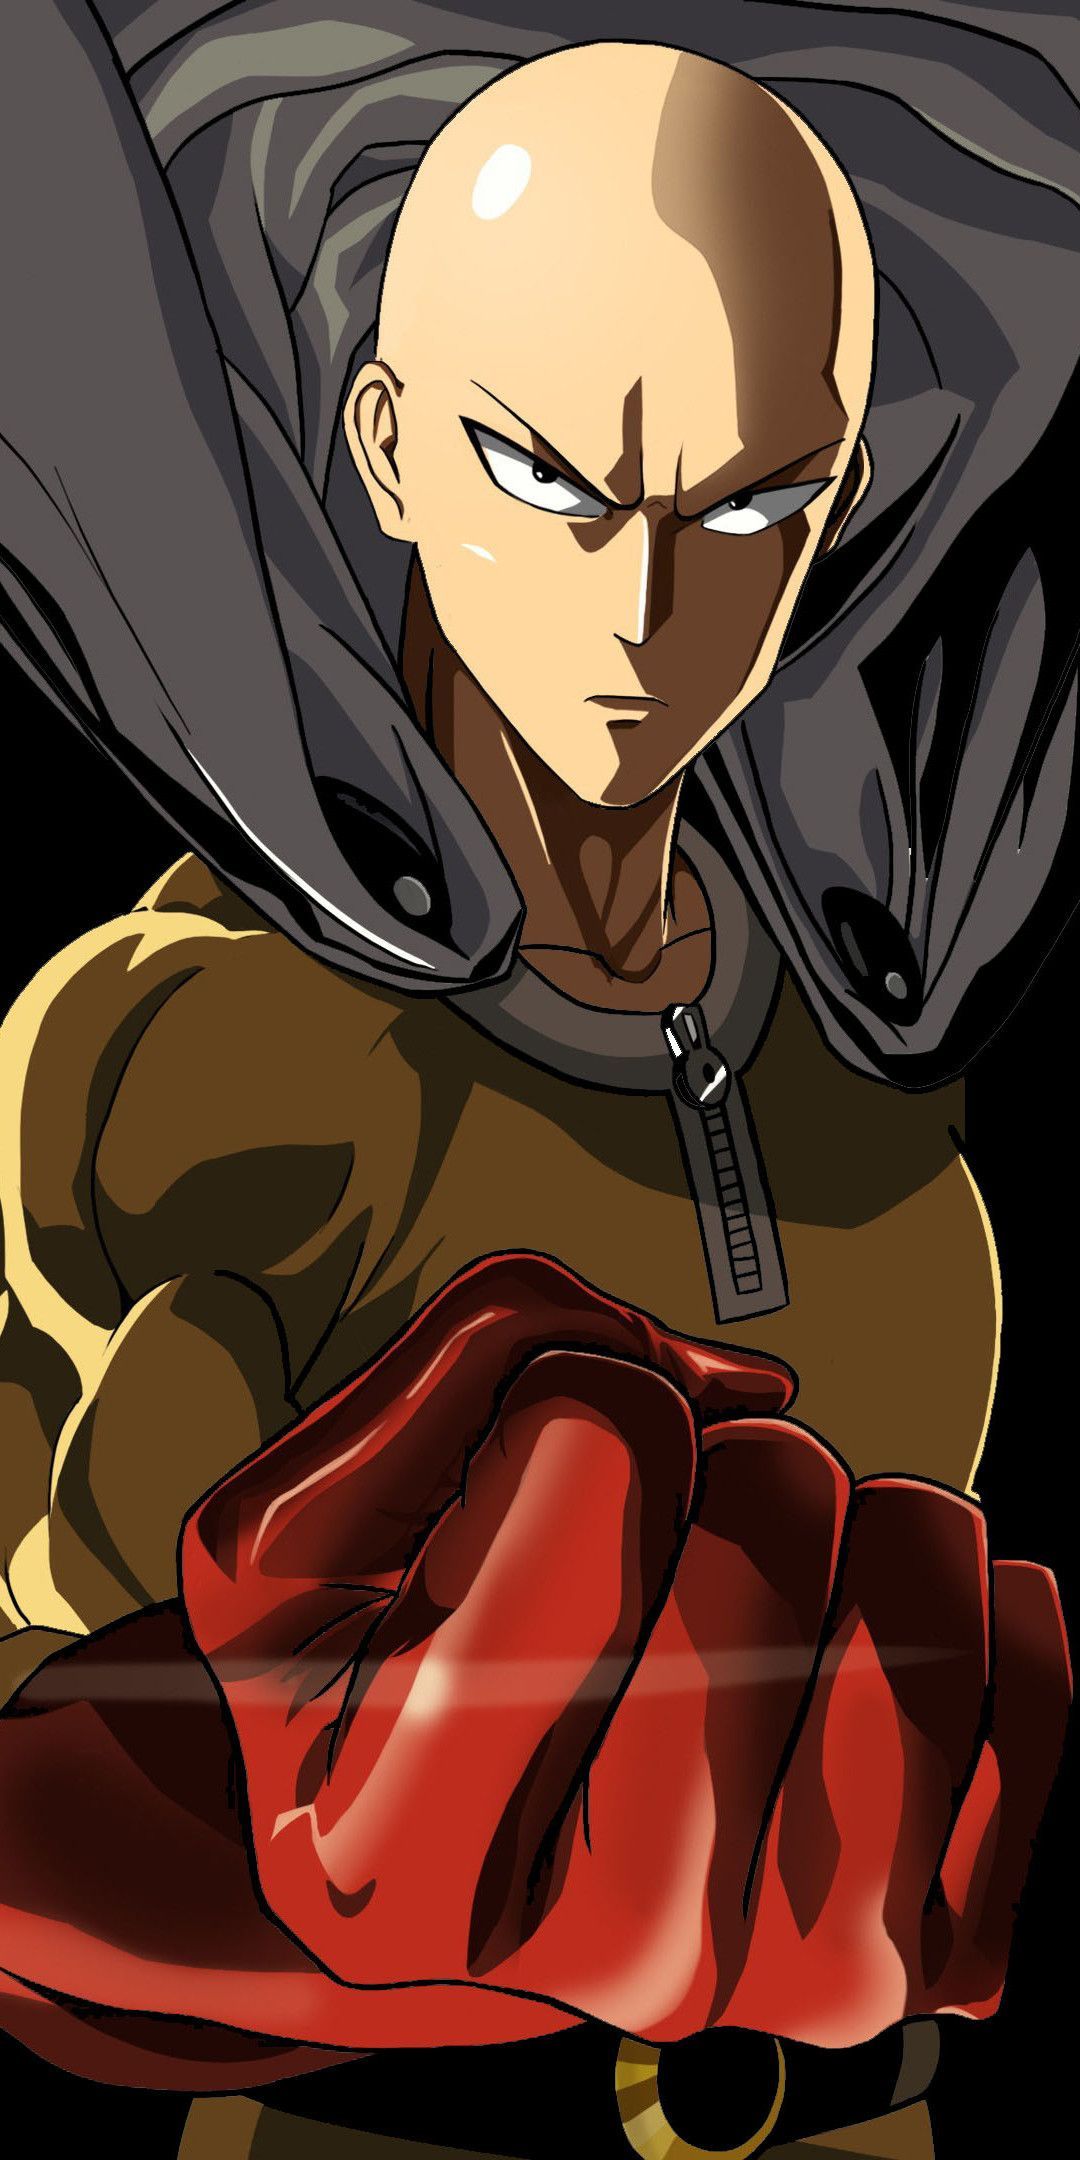 One Punch Man Wallpaper 4k Android Wallpaper Center 01. One punch man anime, One punch man manga, Saitama one punch man